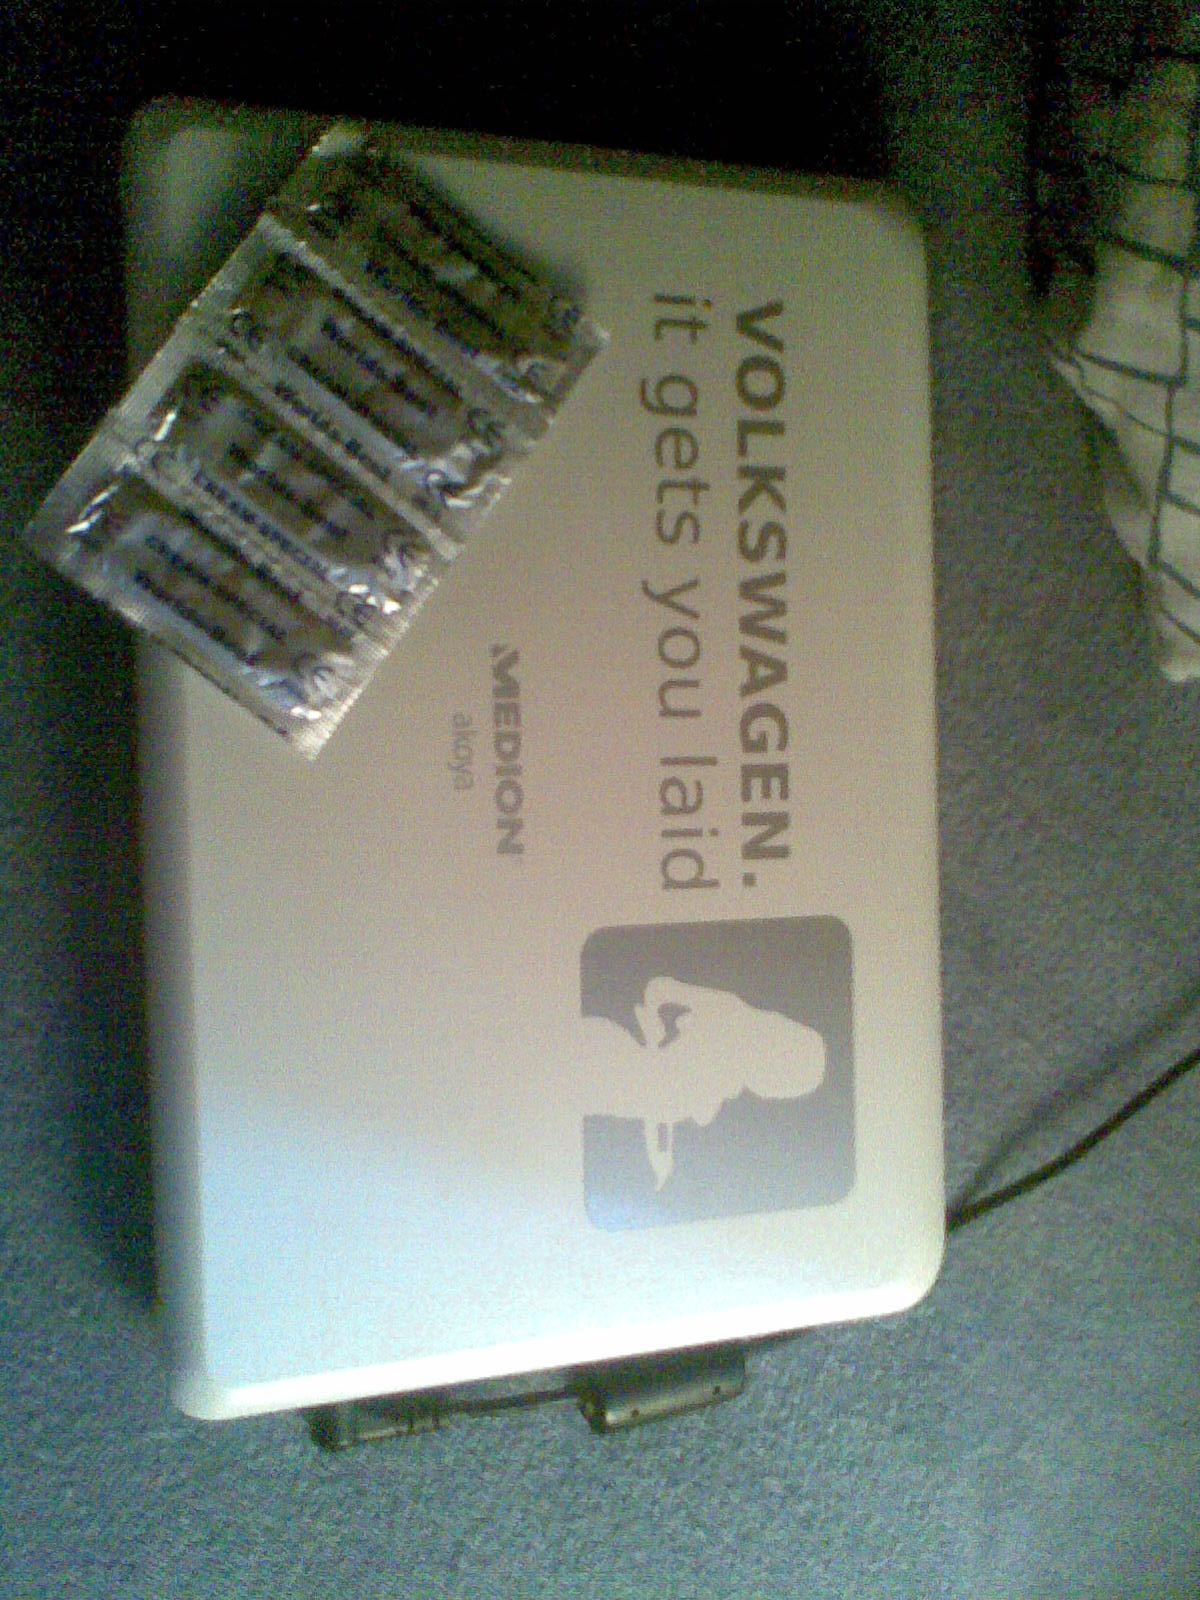 Probably the most awesome laptop sticker ever!